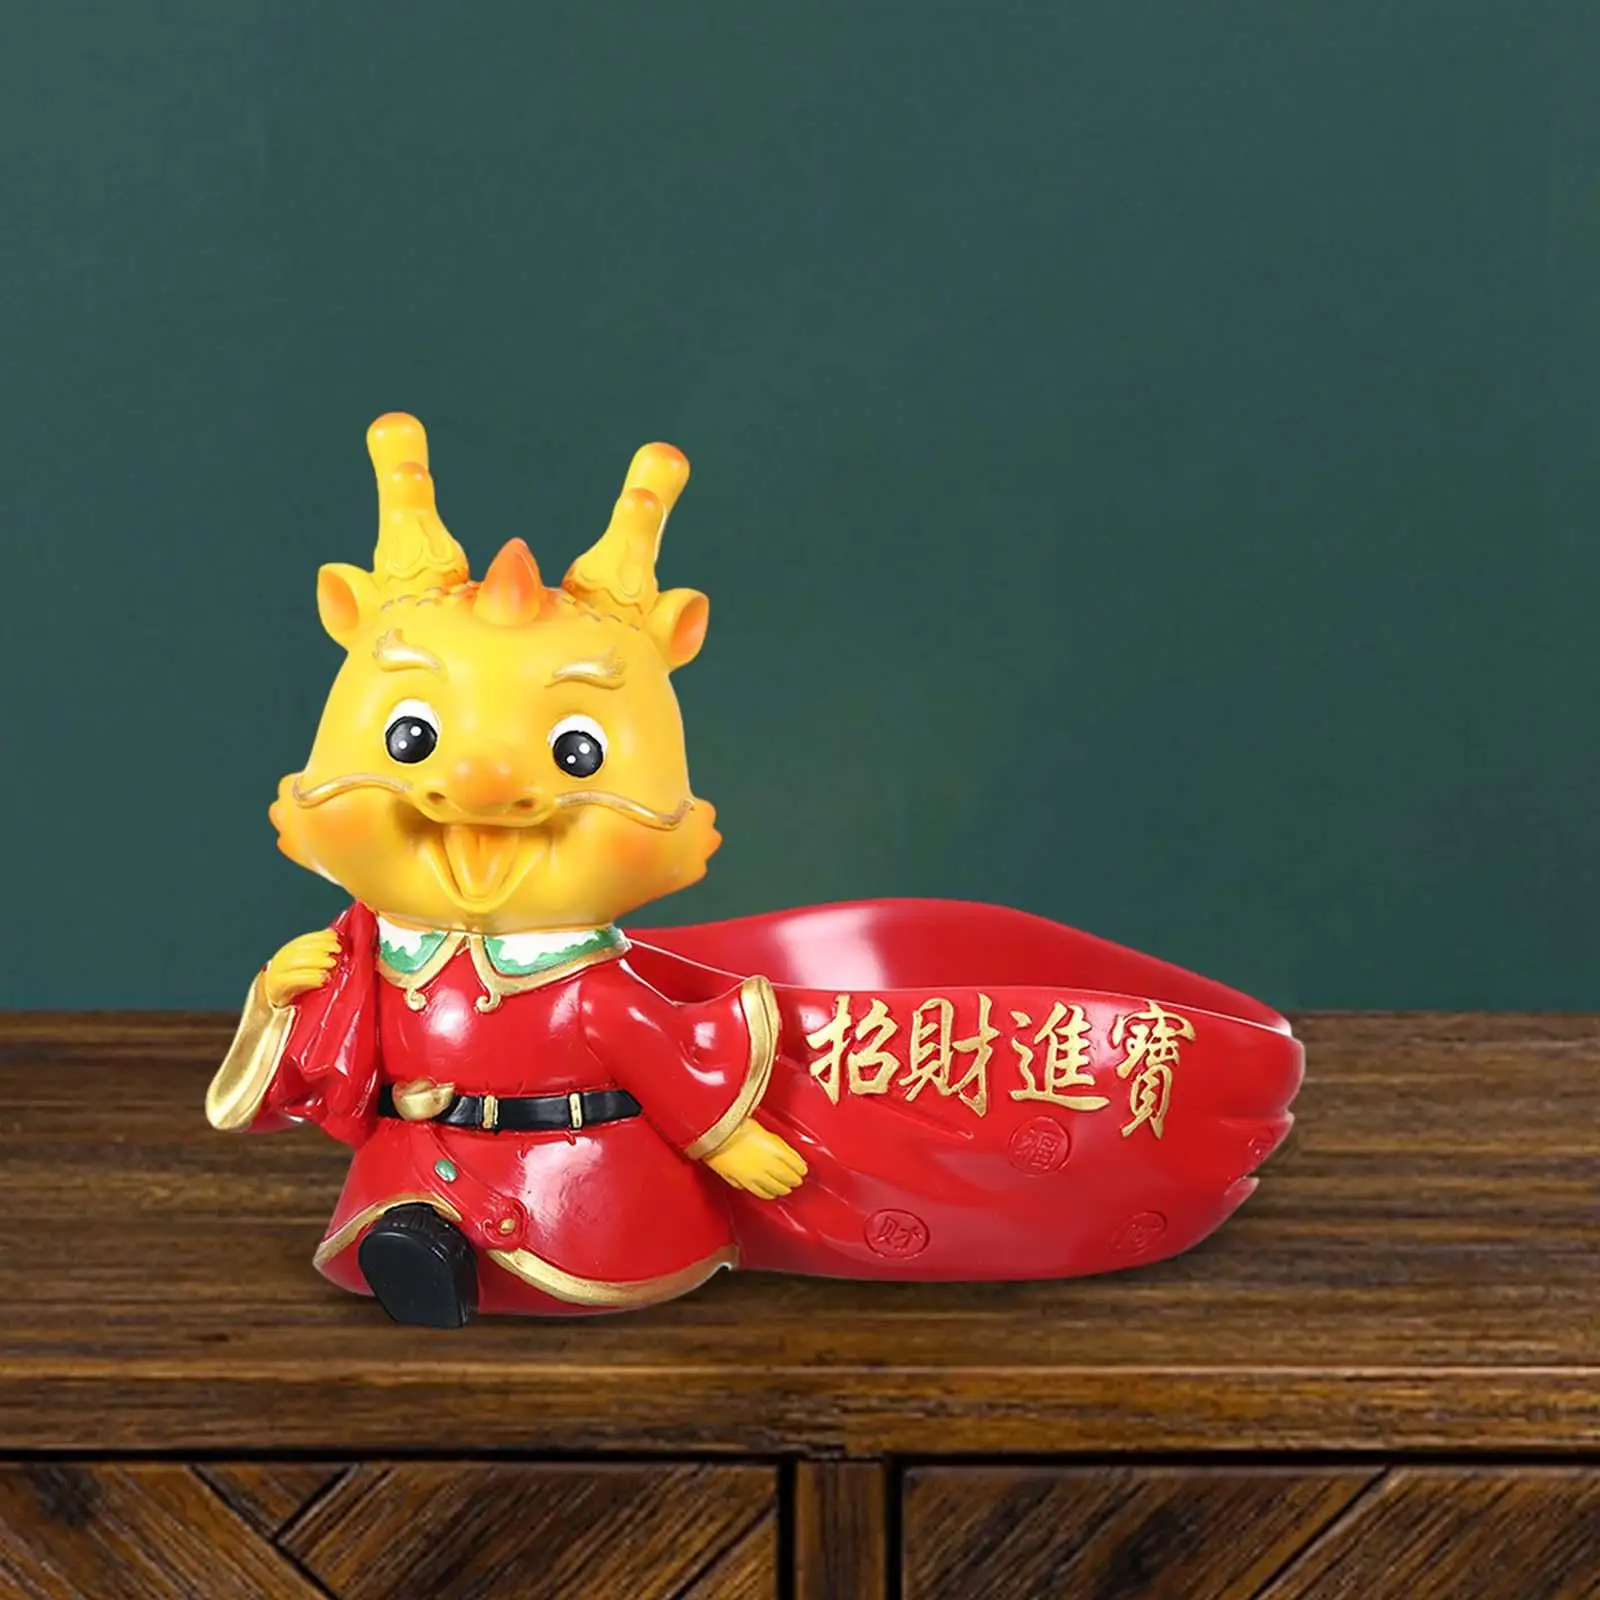 Chinese New Year Dragon Figurine Tray Creative for Cabinet Entrance Desktop